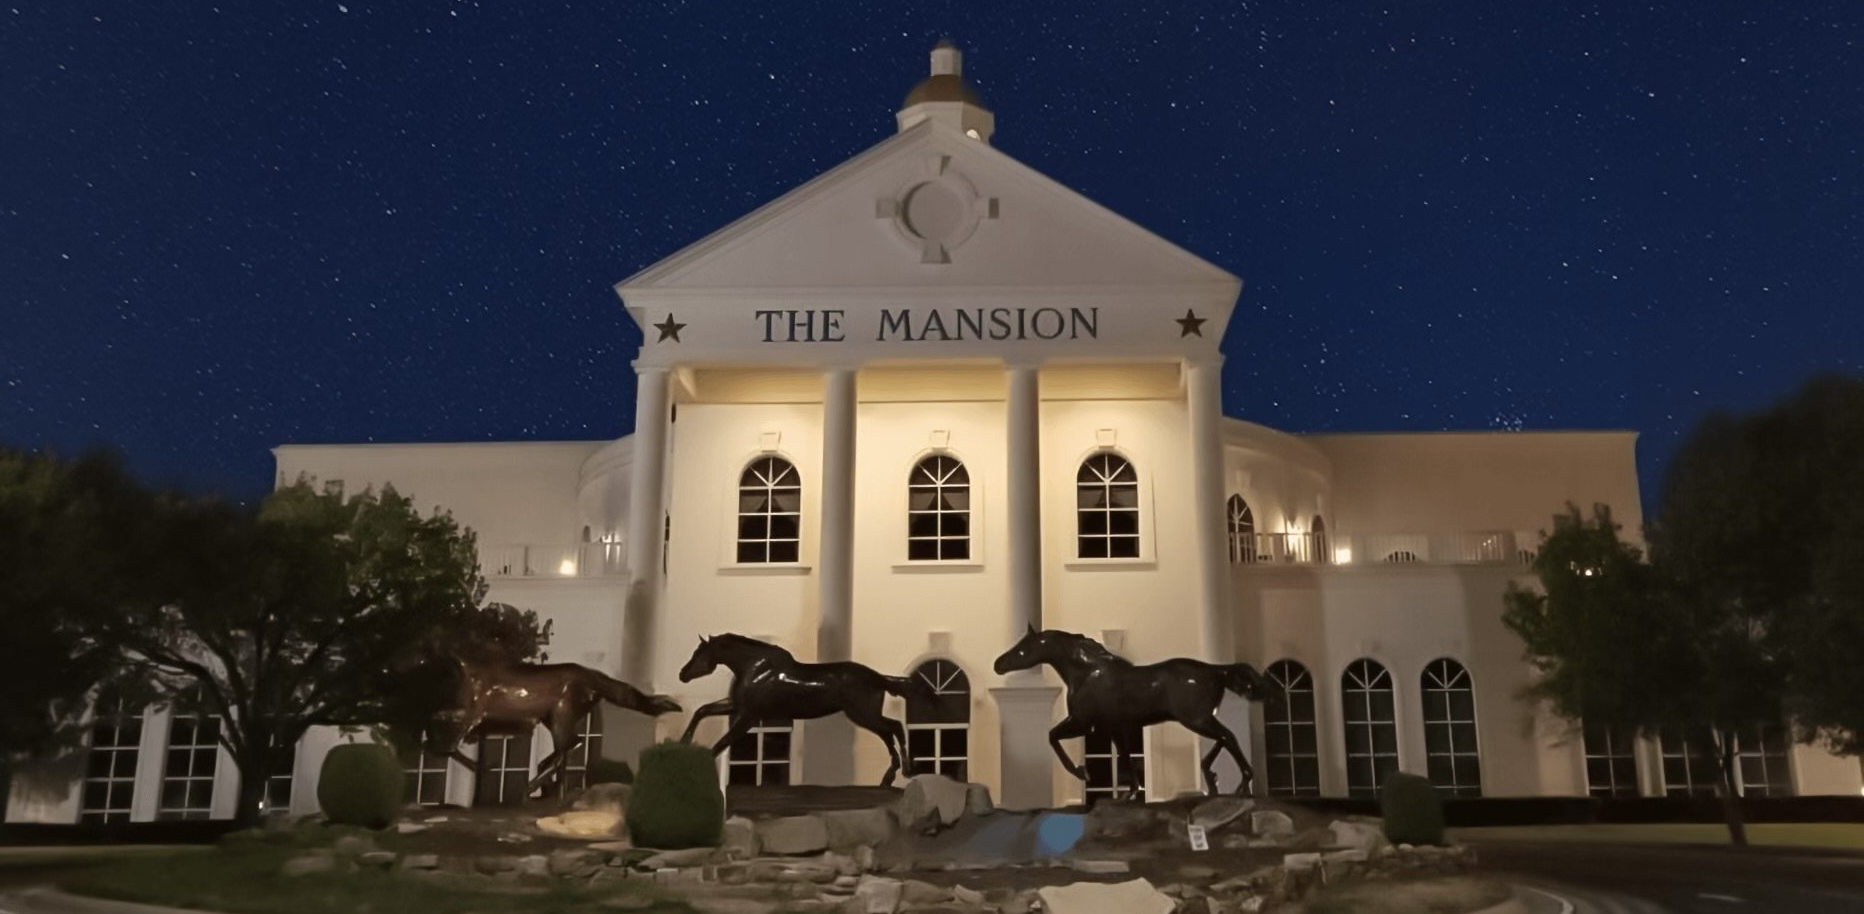 THE MANSION THEATRE FOR THE PERFORMING ARTS RAISES THE CURTAIN AS PREMIERE MIDWEST VENUE